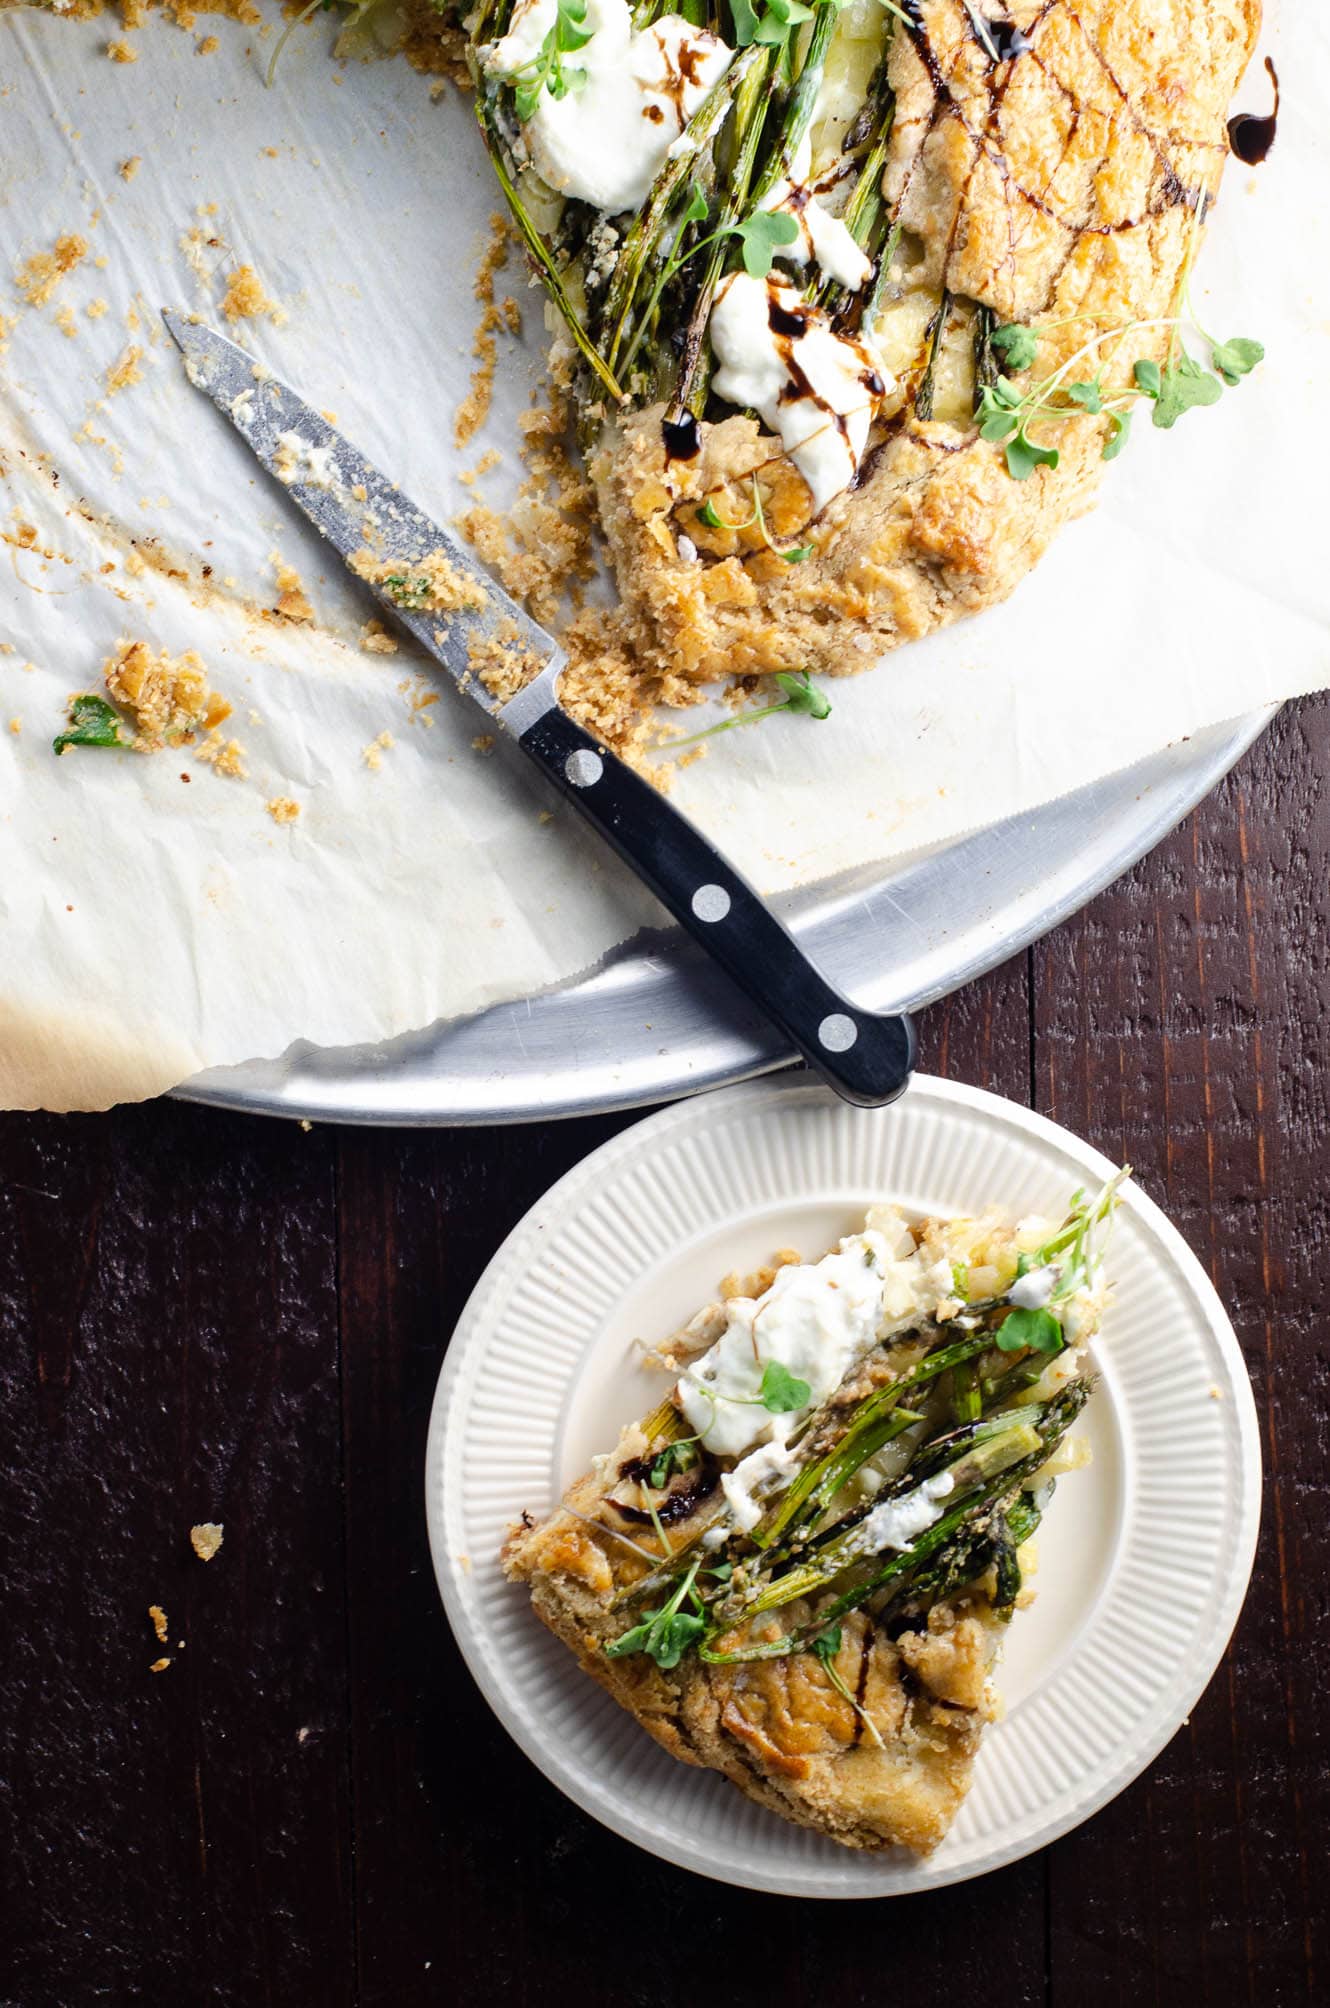 a slice of an asparagus galette with jammy leeks, ricotta, and burrata made with savory tart dough